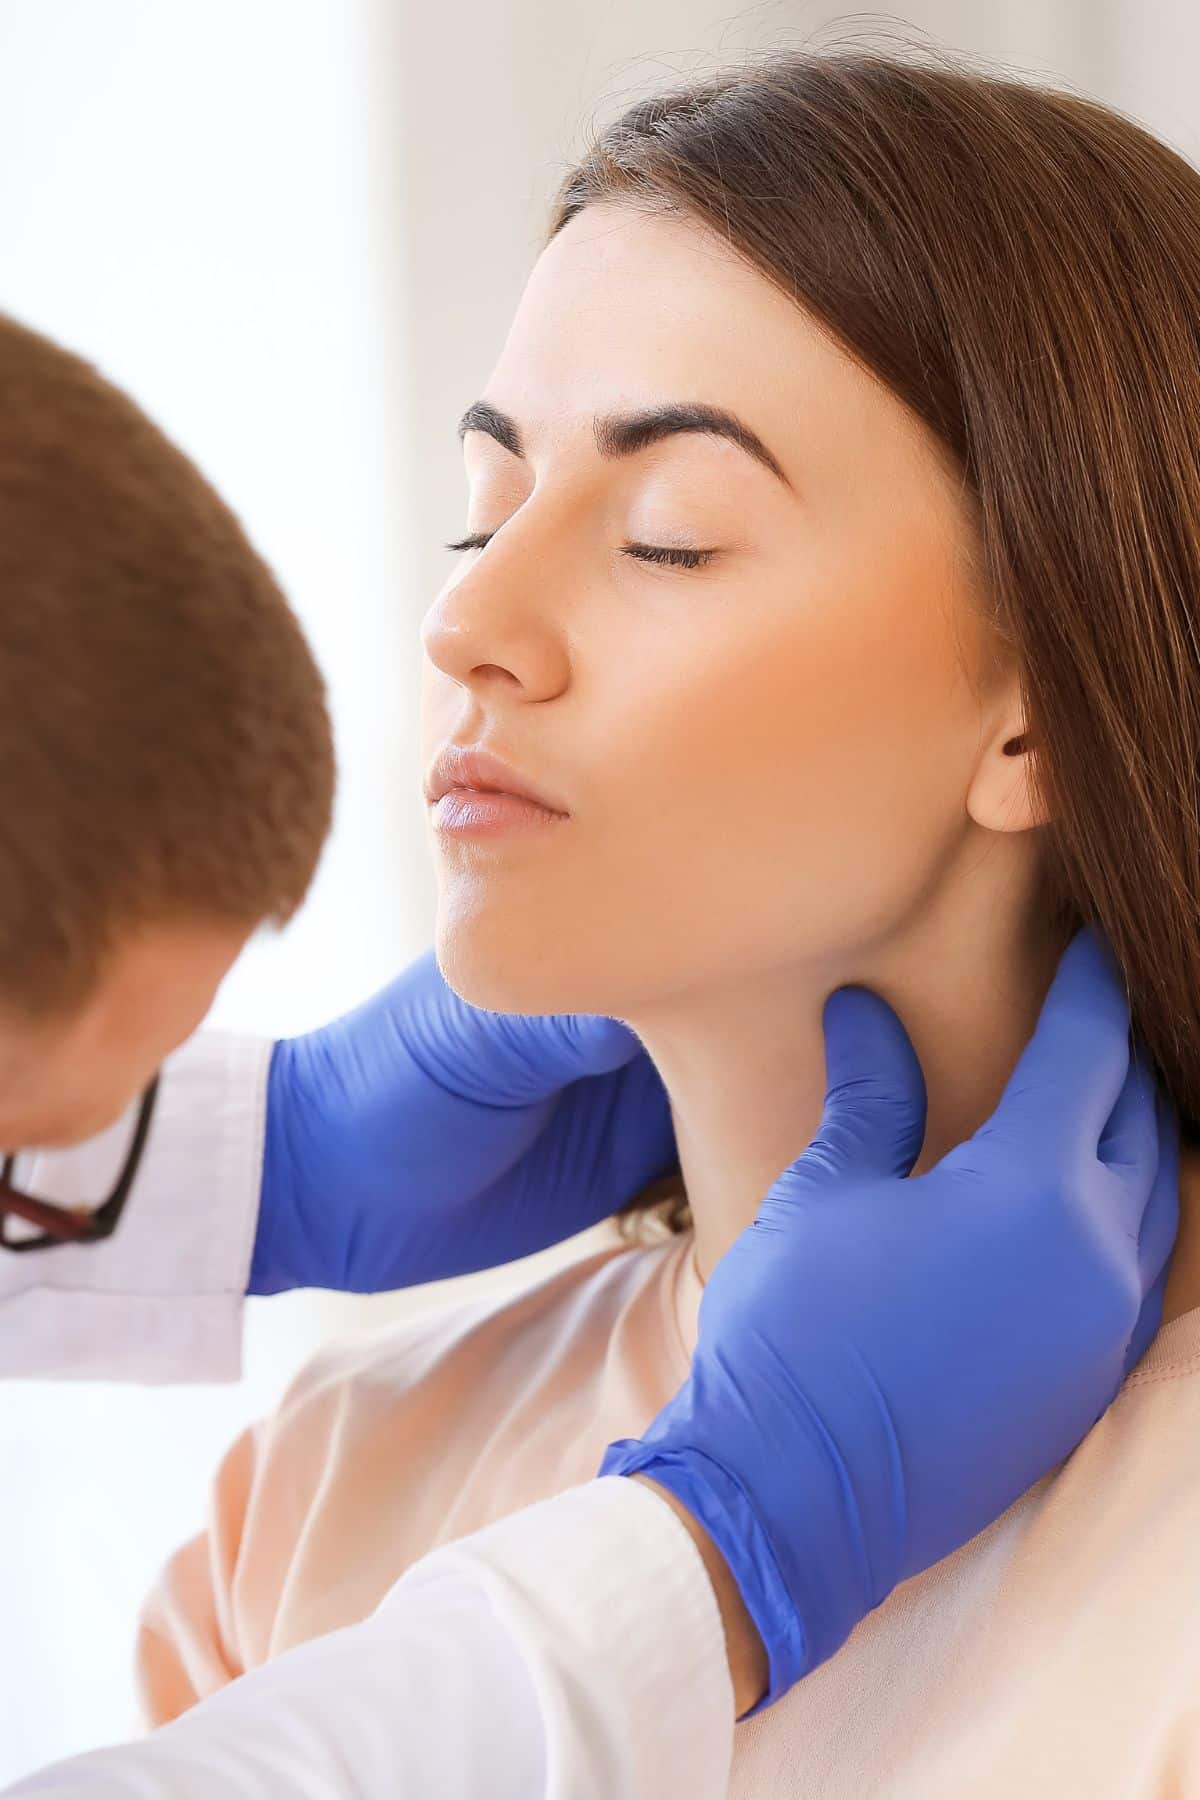 a woman having her neck examined by a doctor.